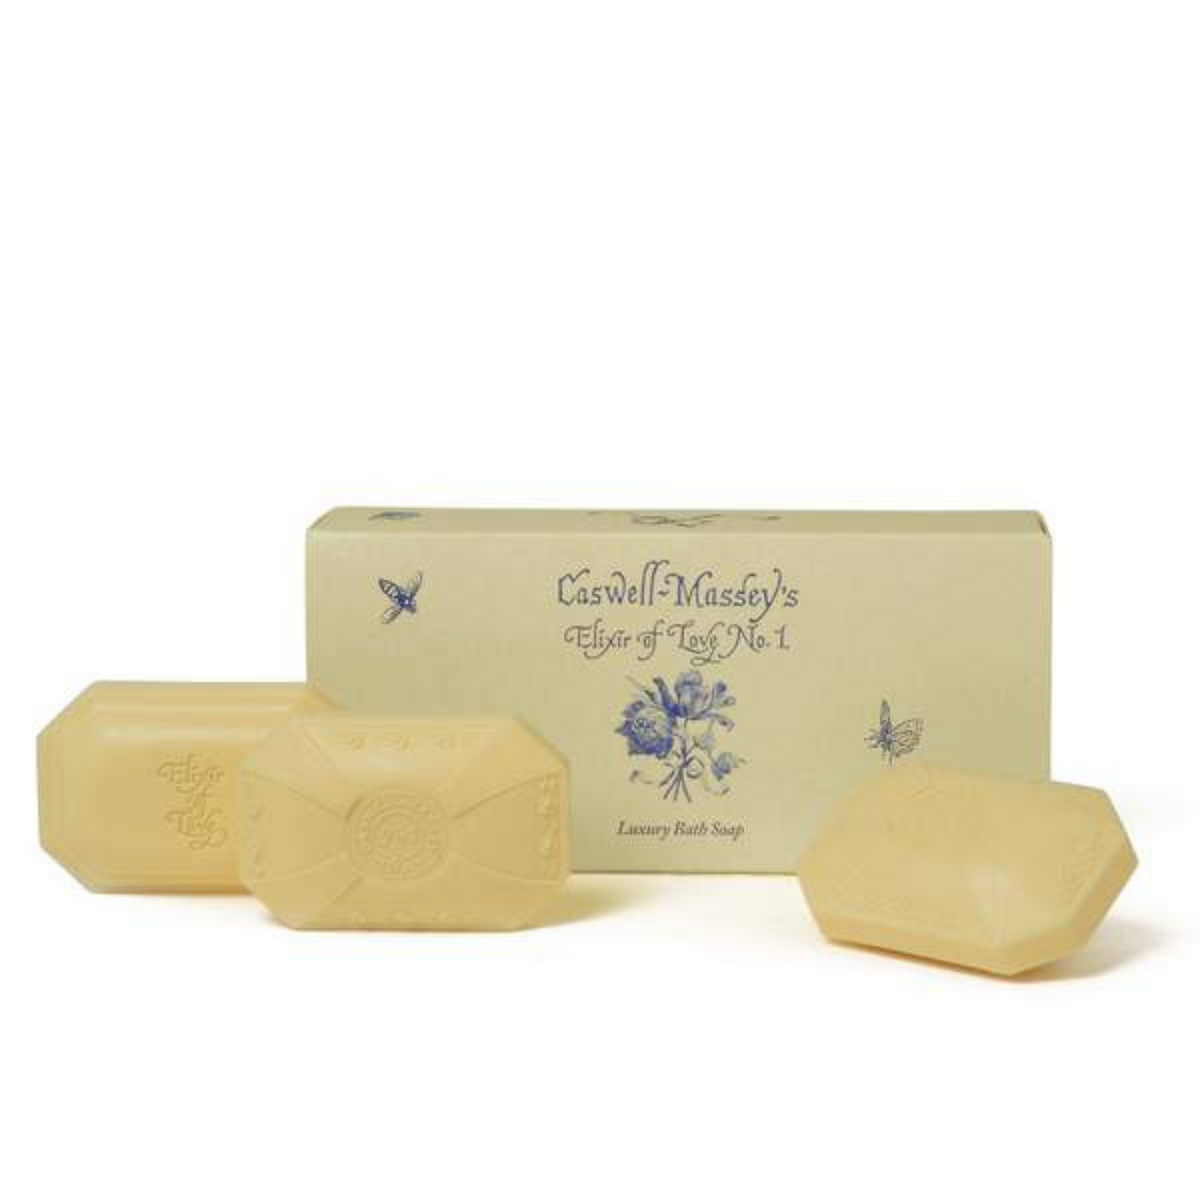 Primary image of Elixir of Love Soap - (Box of 3)